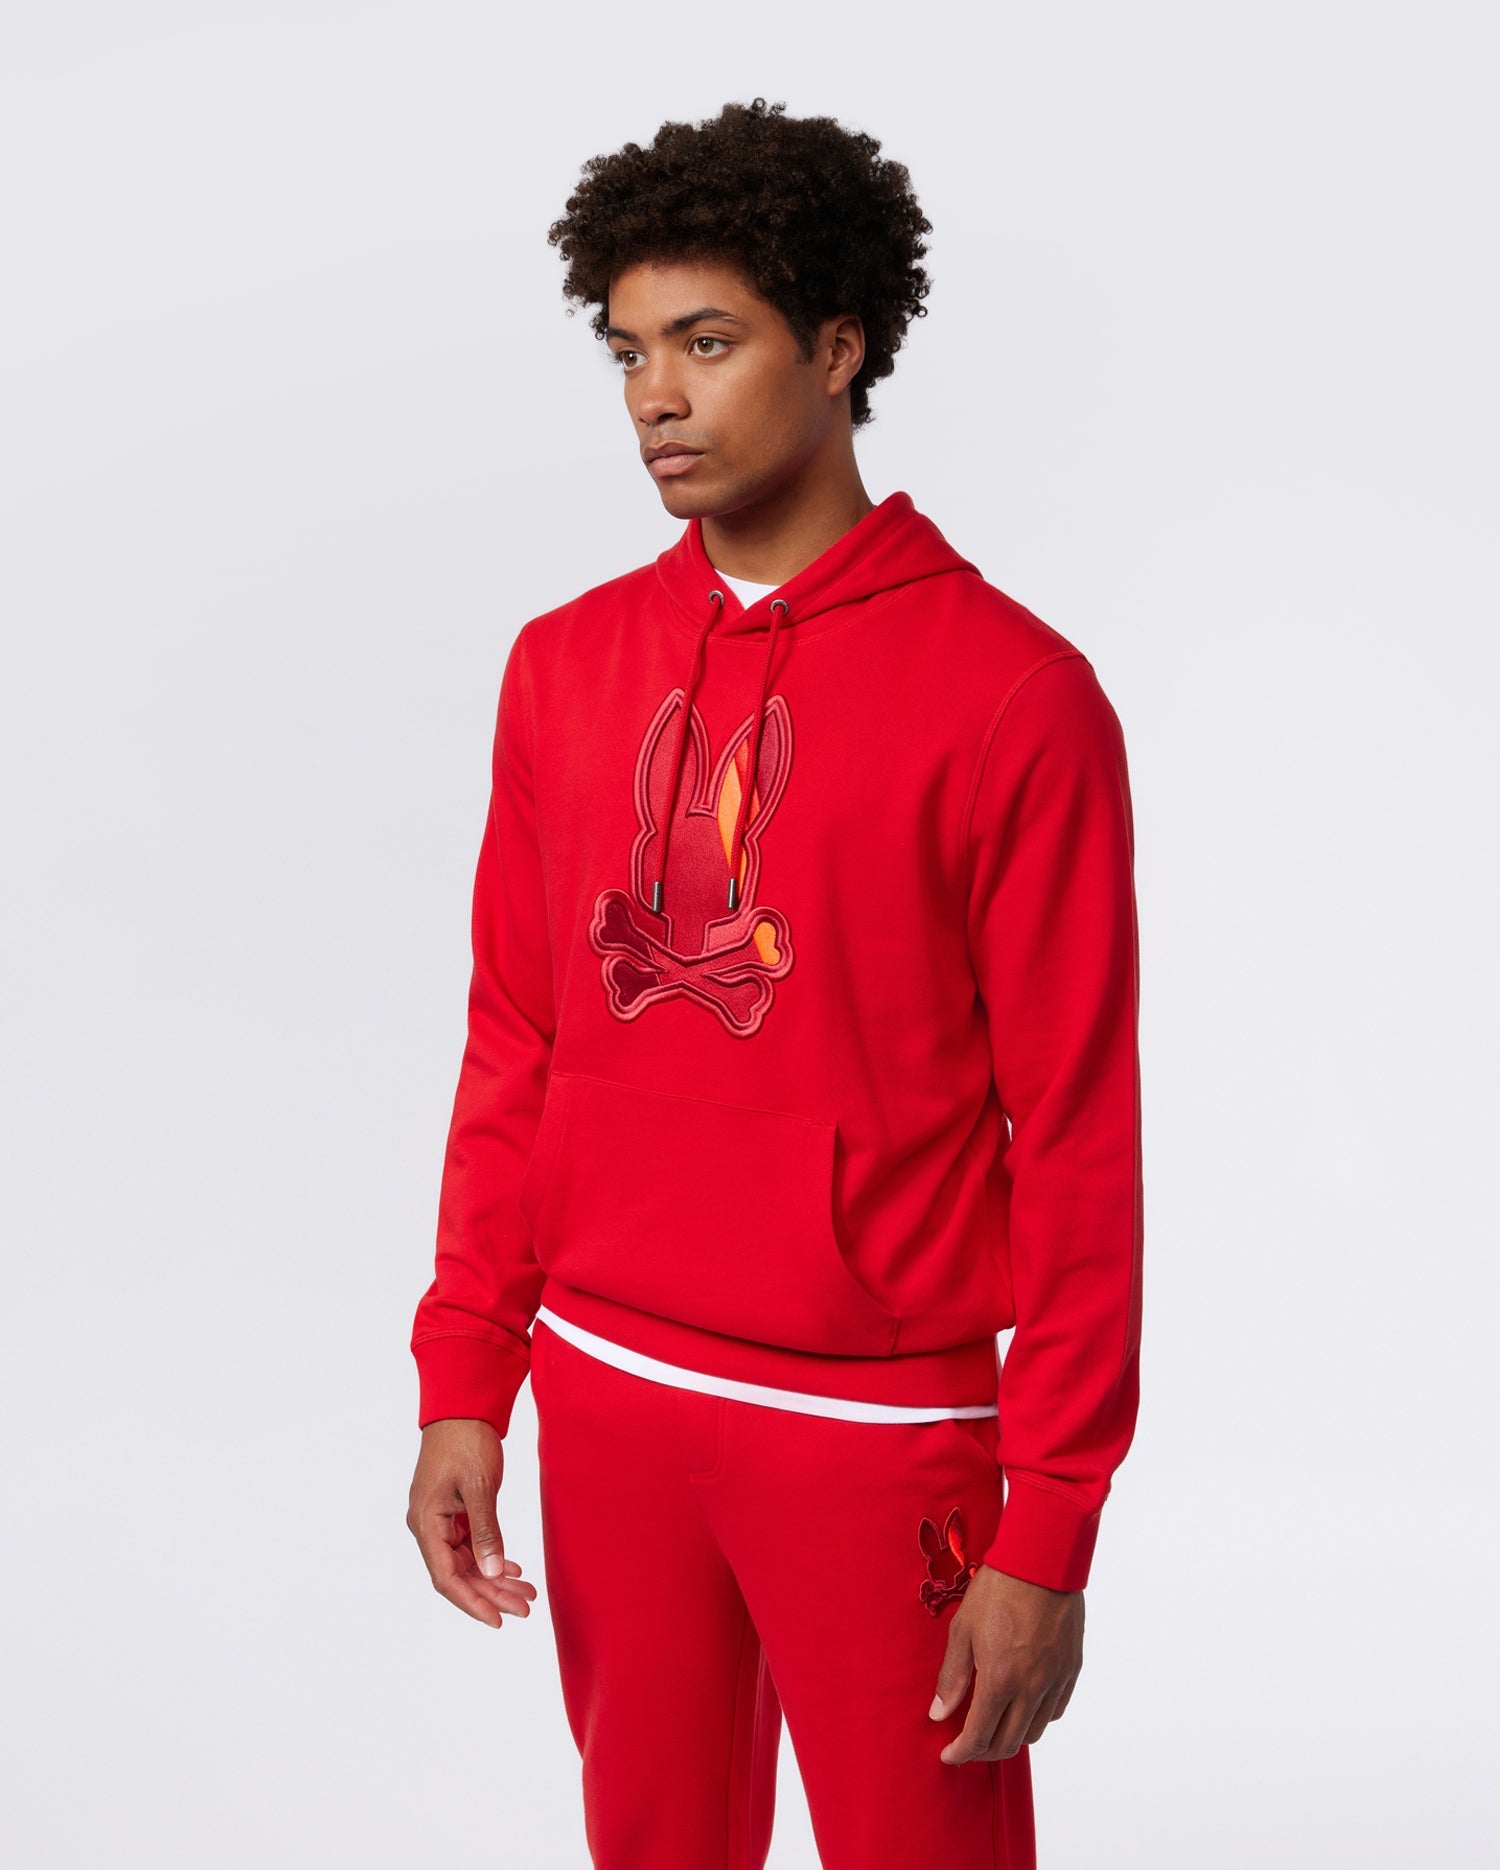 Psycho Bunny Sweatsuits Promo: Limited Time Offer